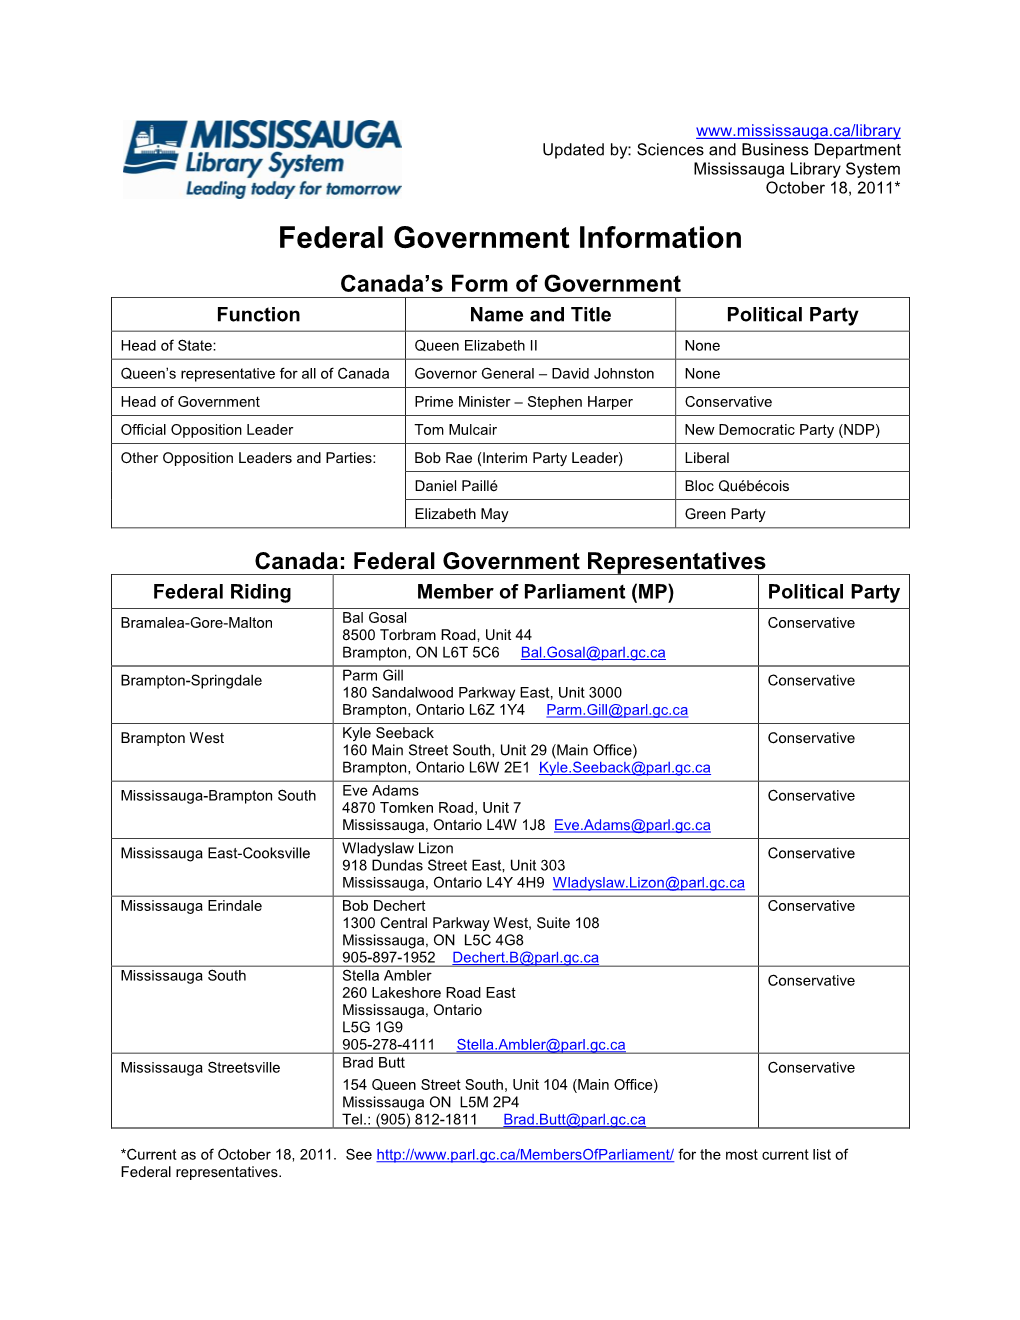 Federal Government Information